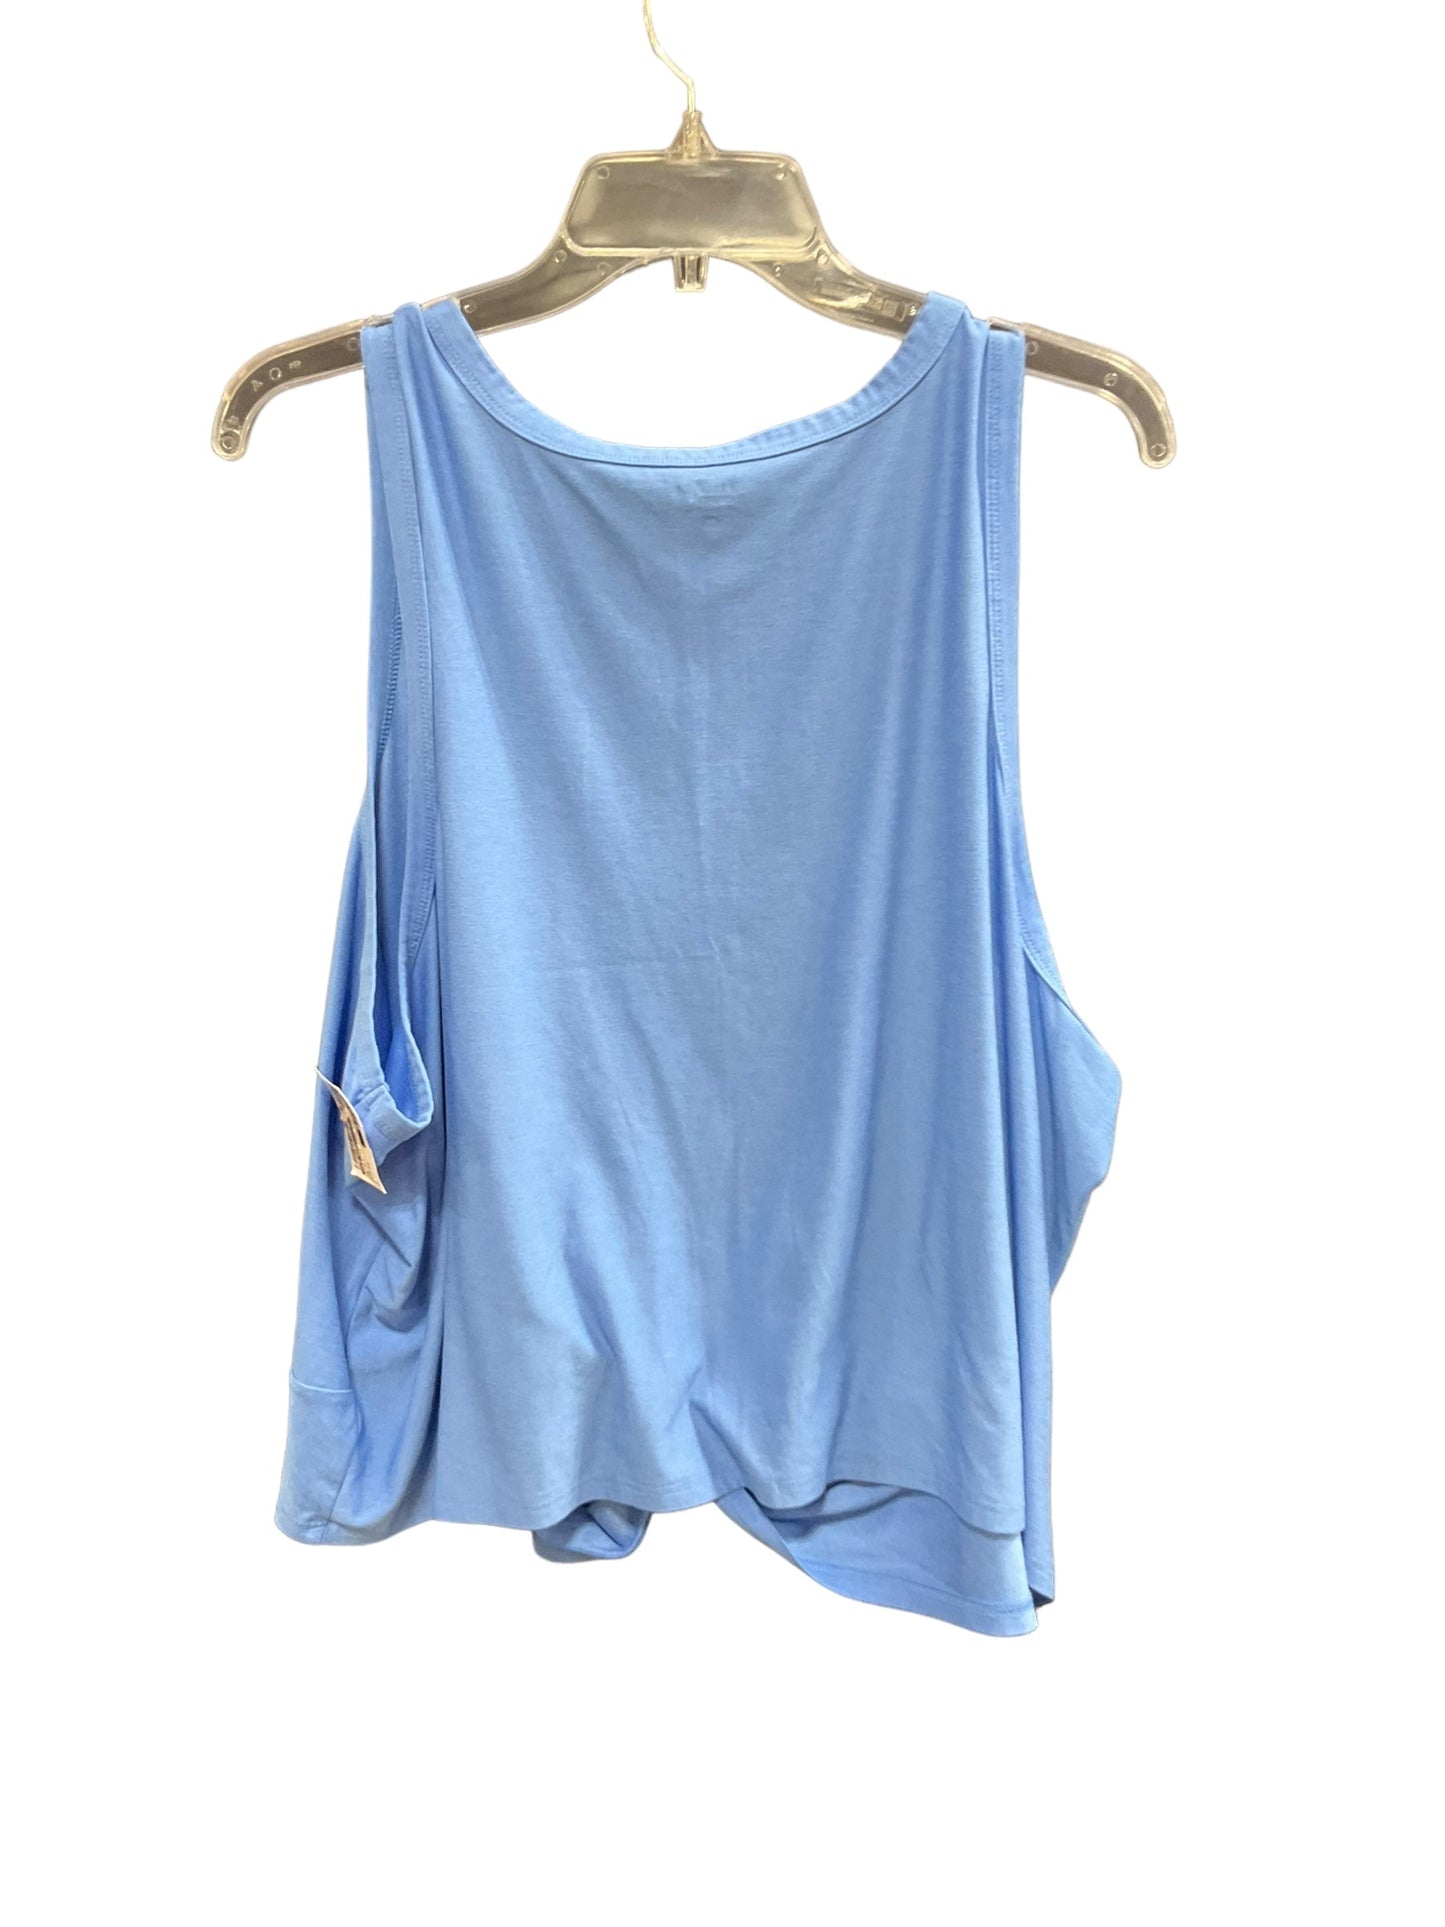 Blue Athletic Tank Top Old Navy, Size 3x